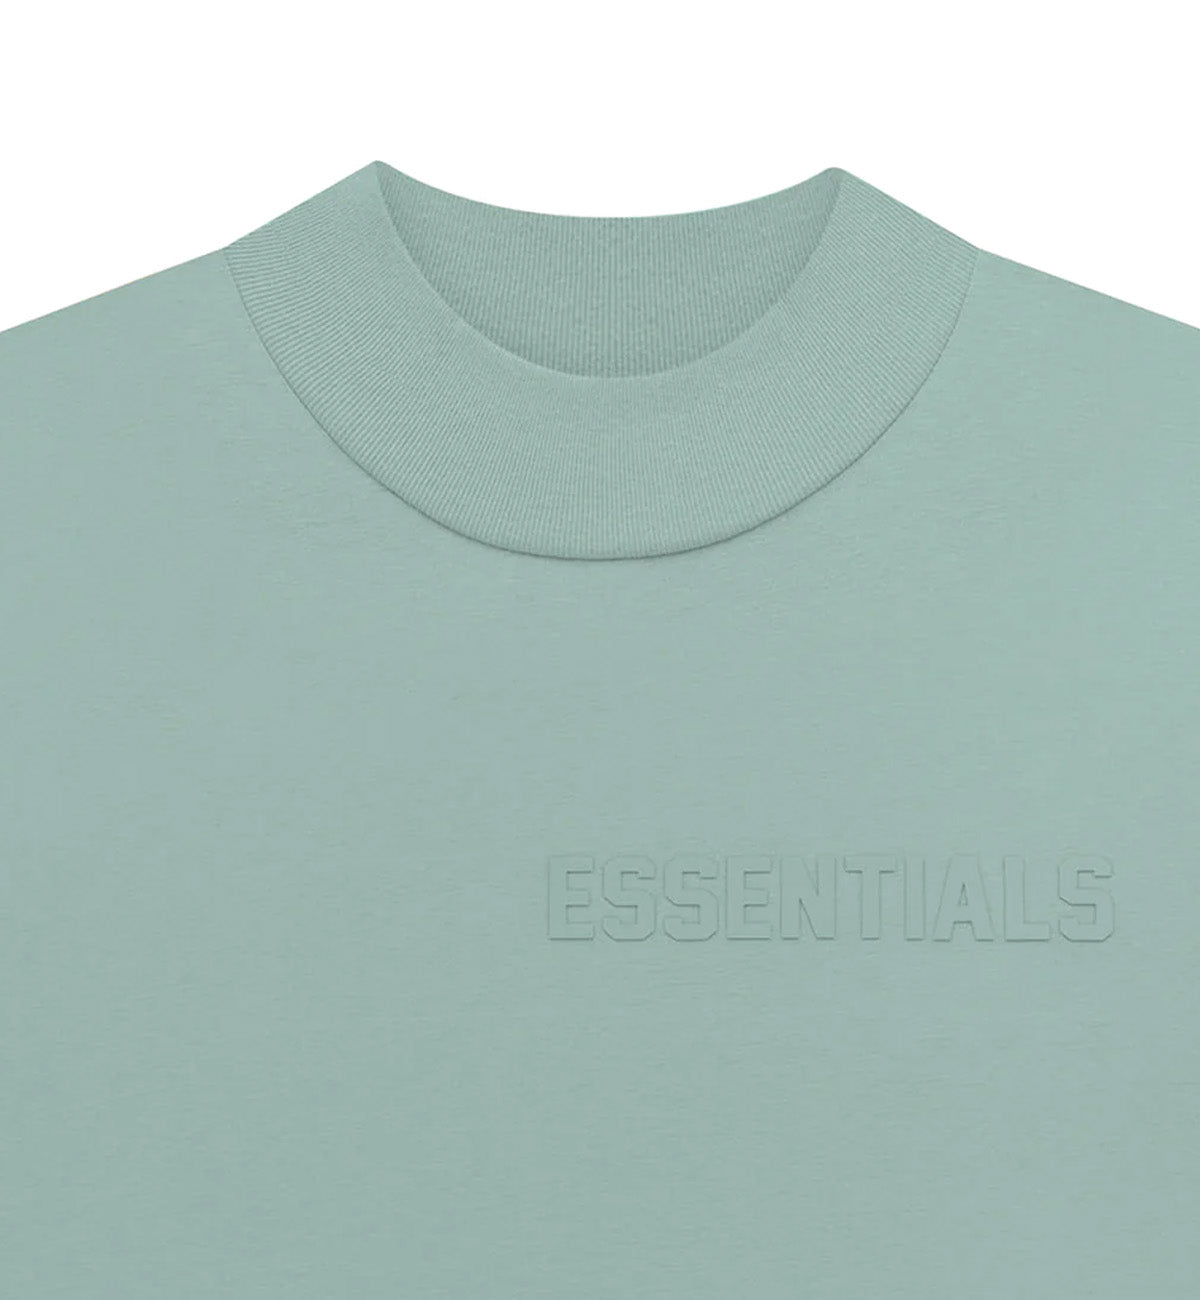 Fear of God Essential SS23 Long Sleeve T-Shirt (Sycamore)